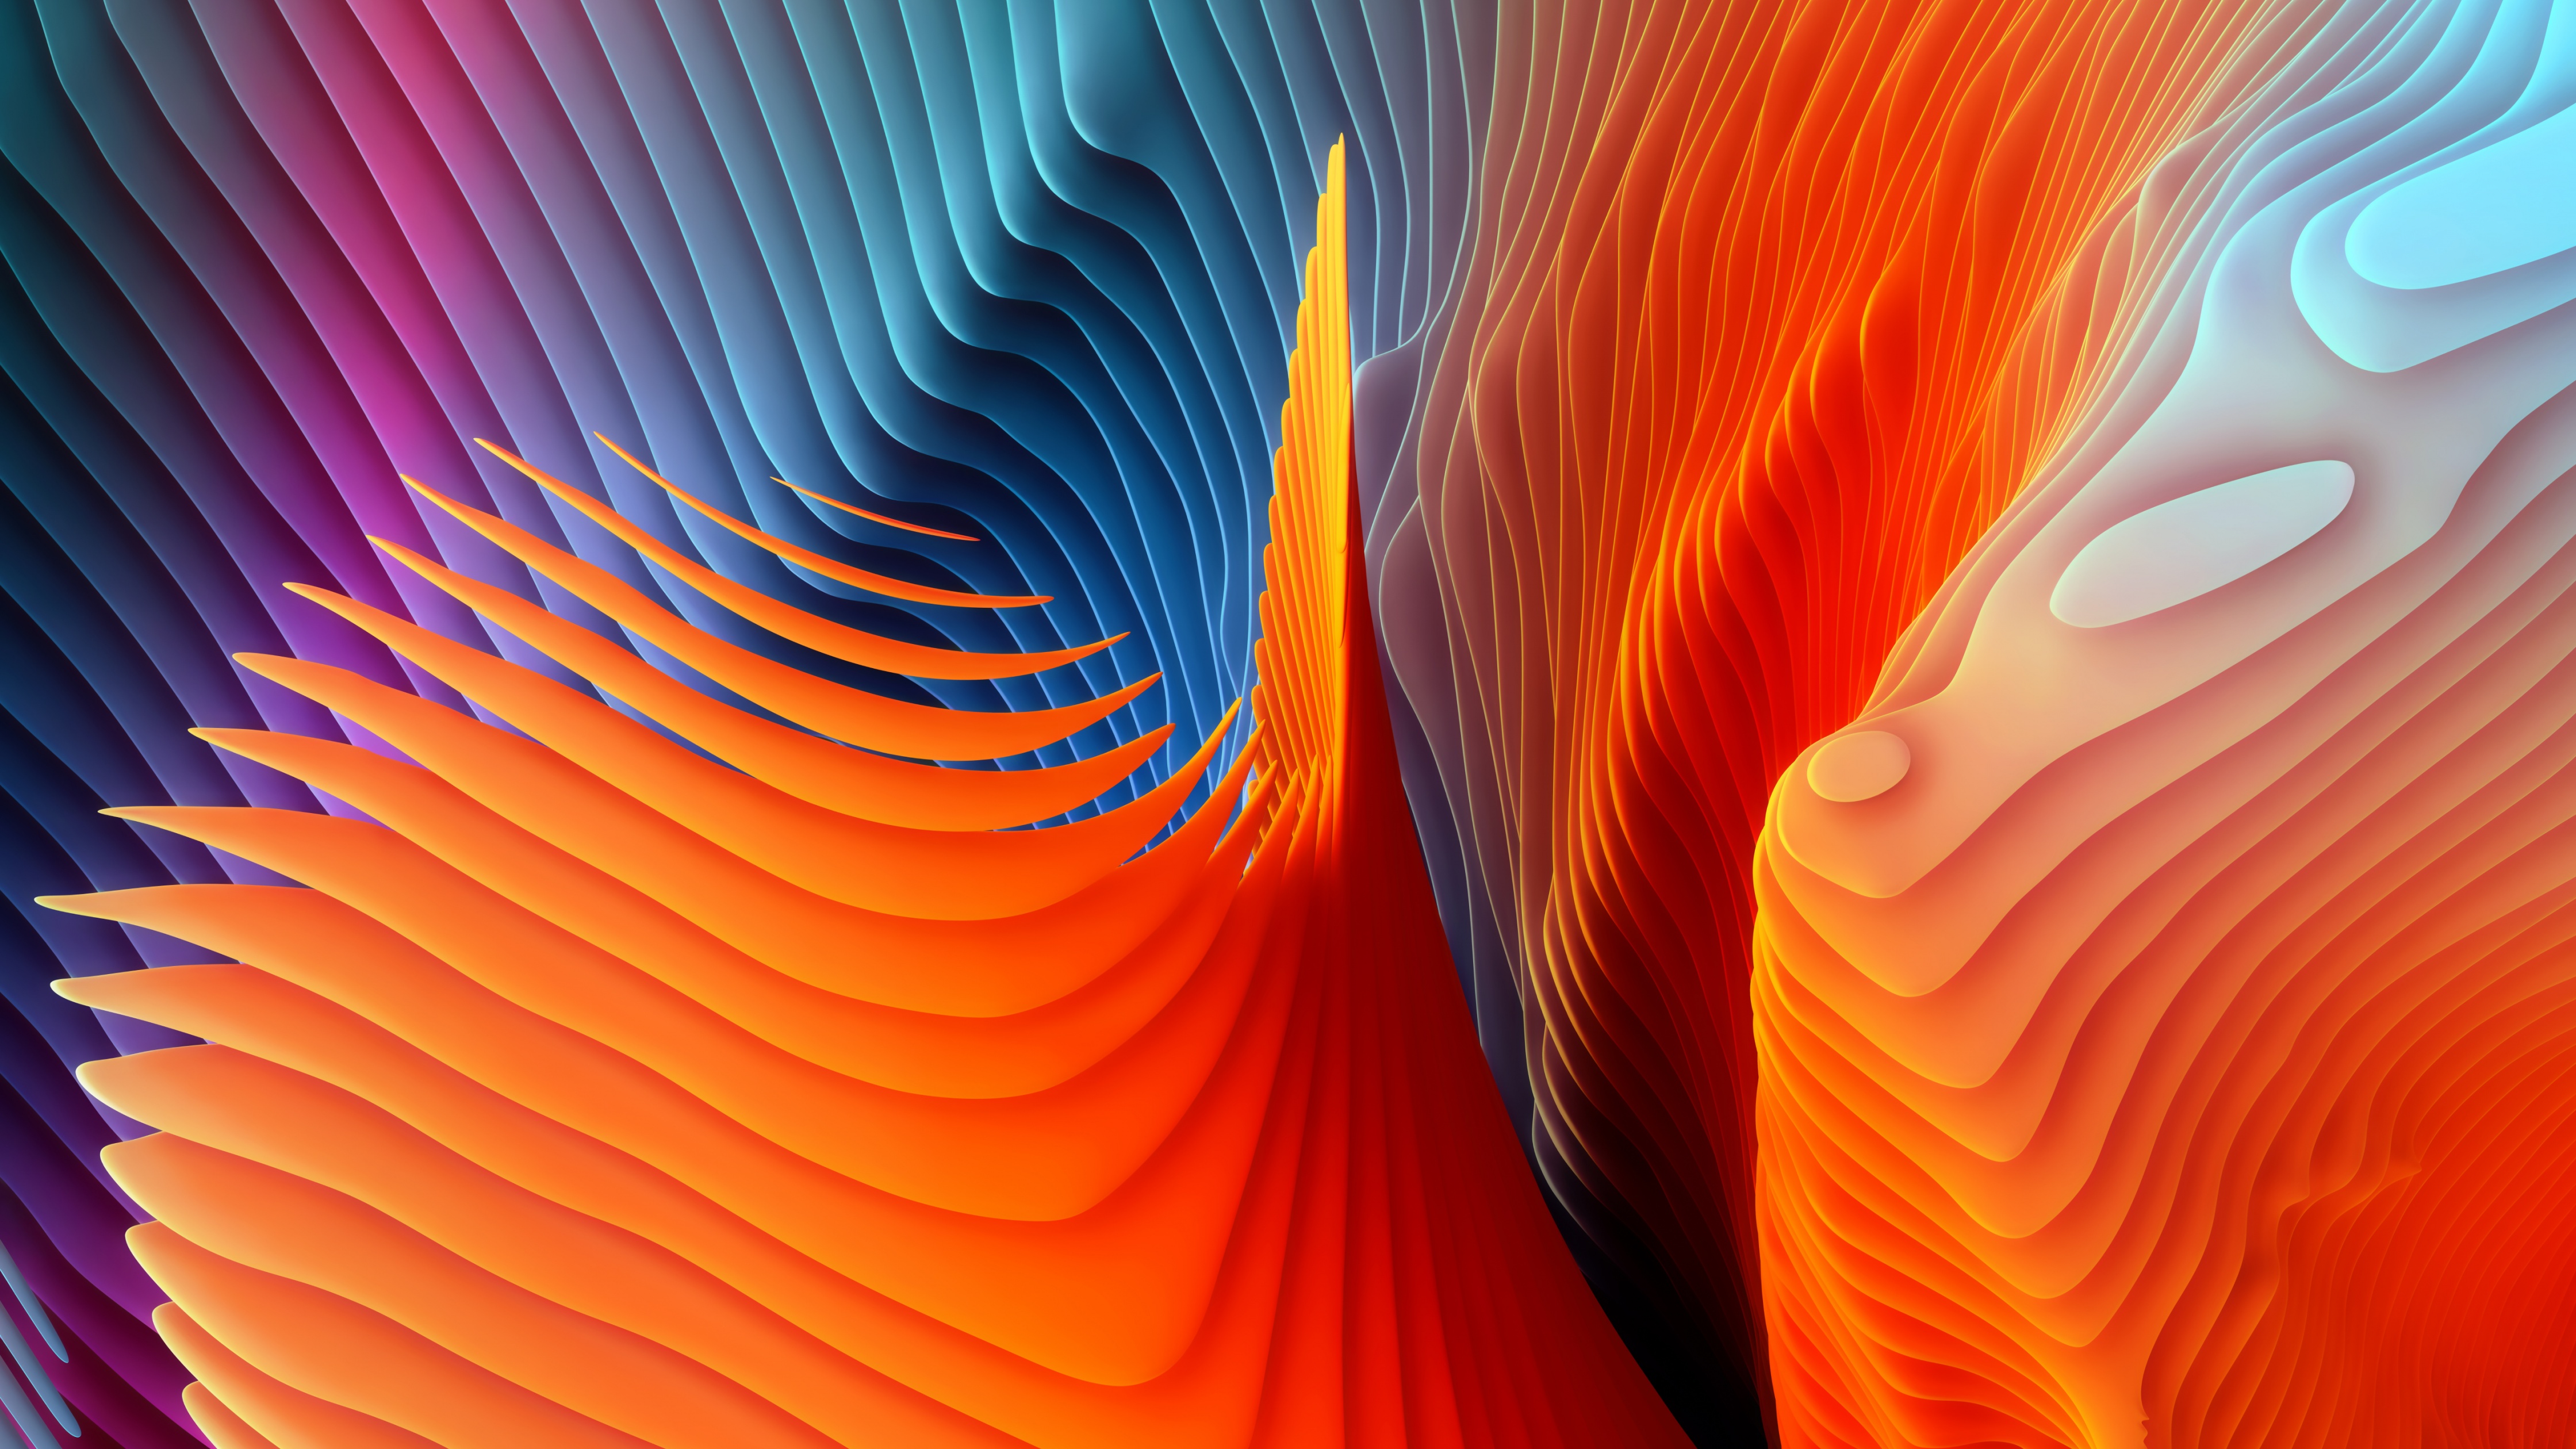 Abstract Wallpaper Images  Free Download on Freepik